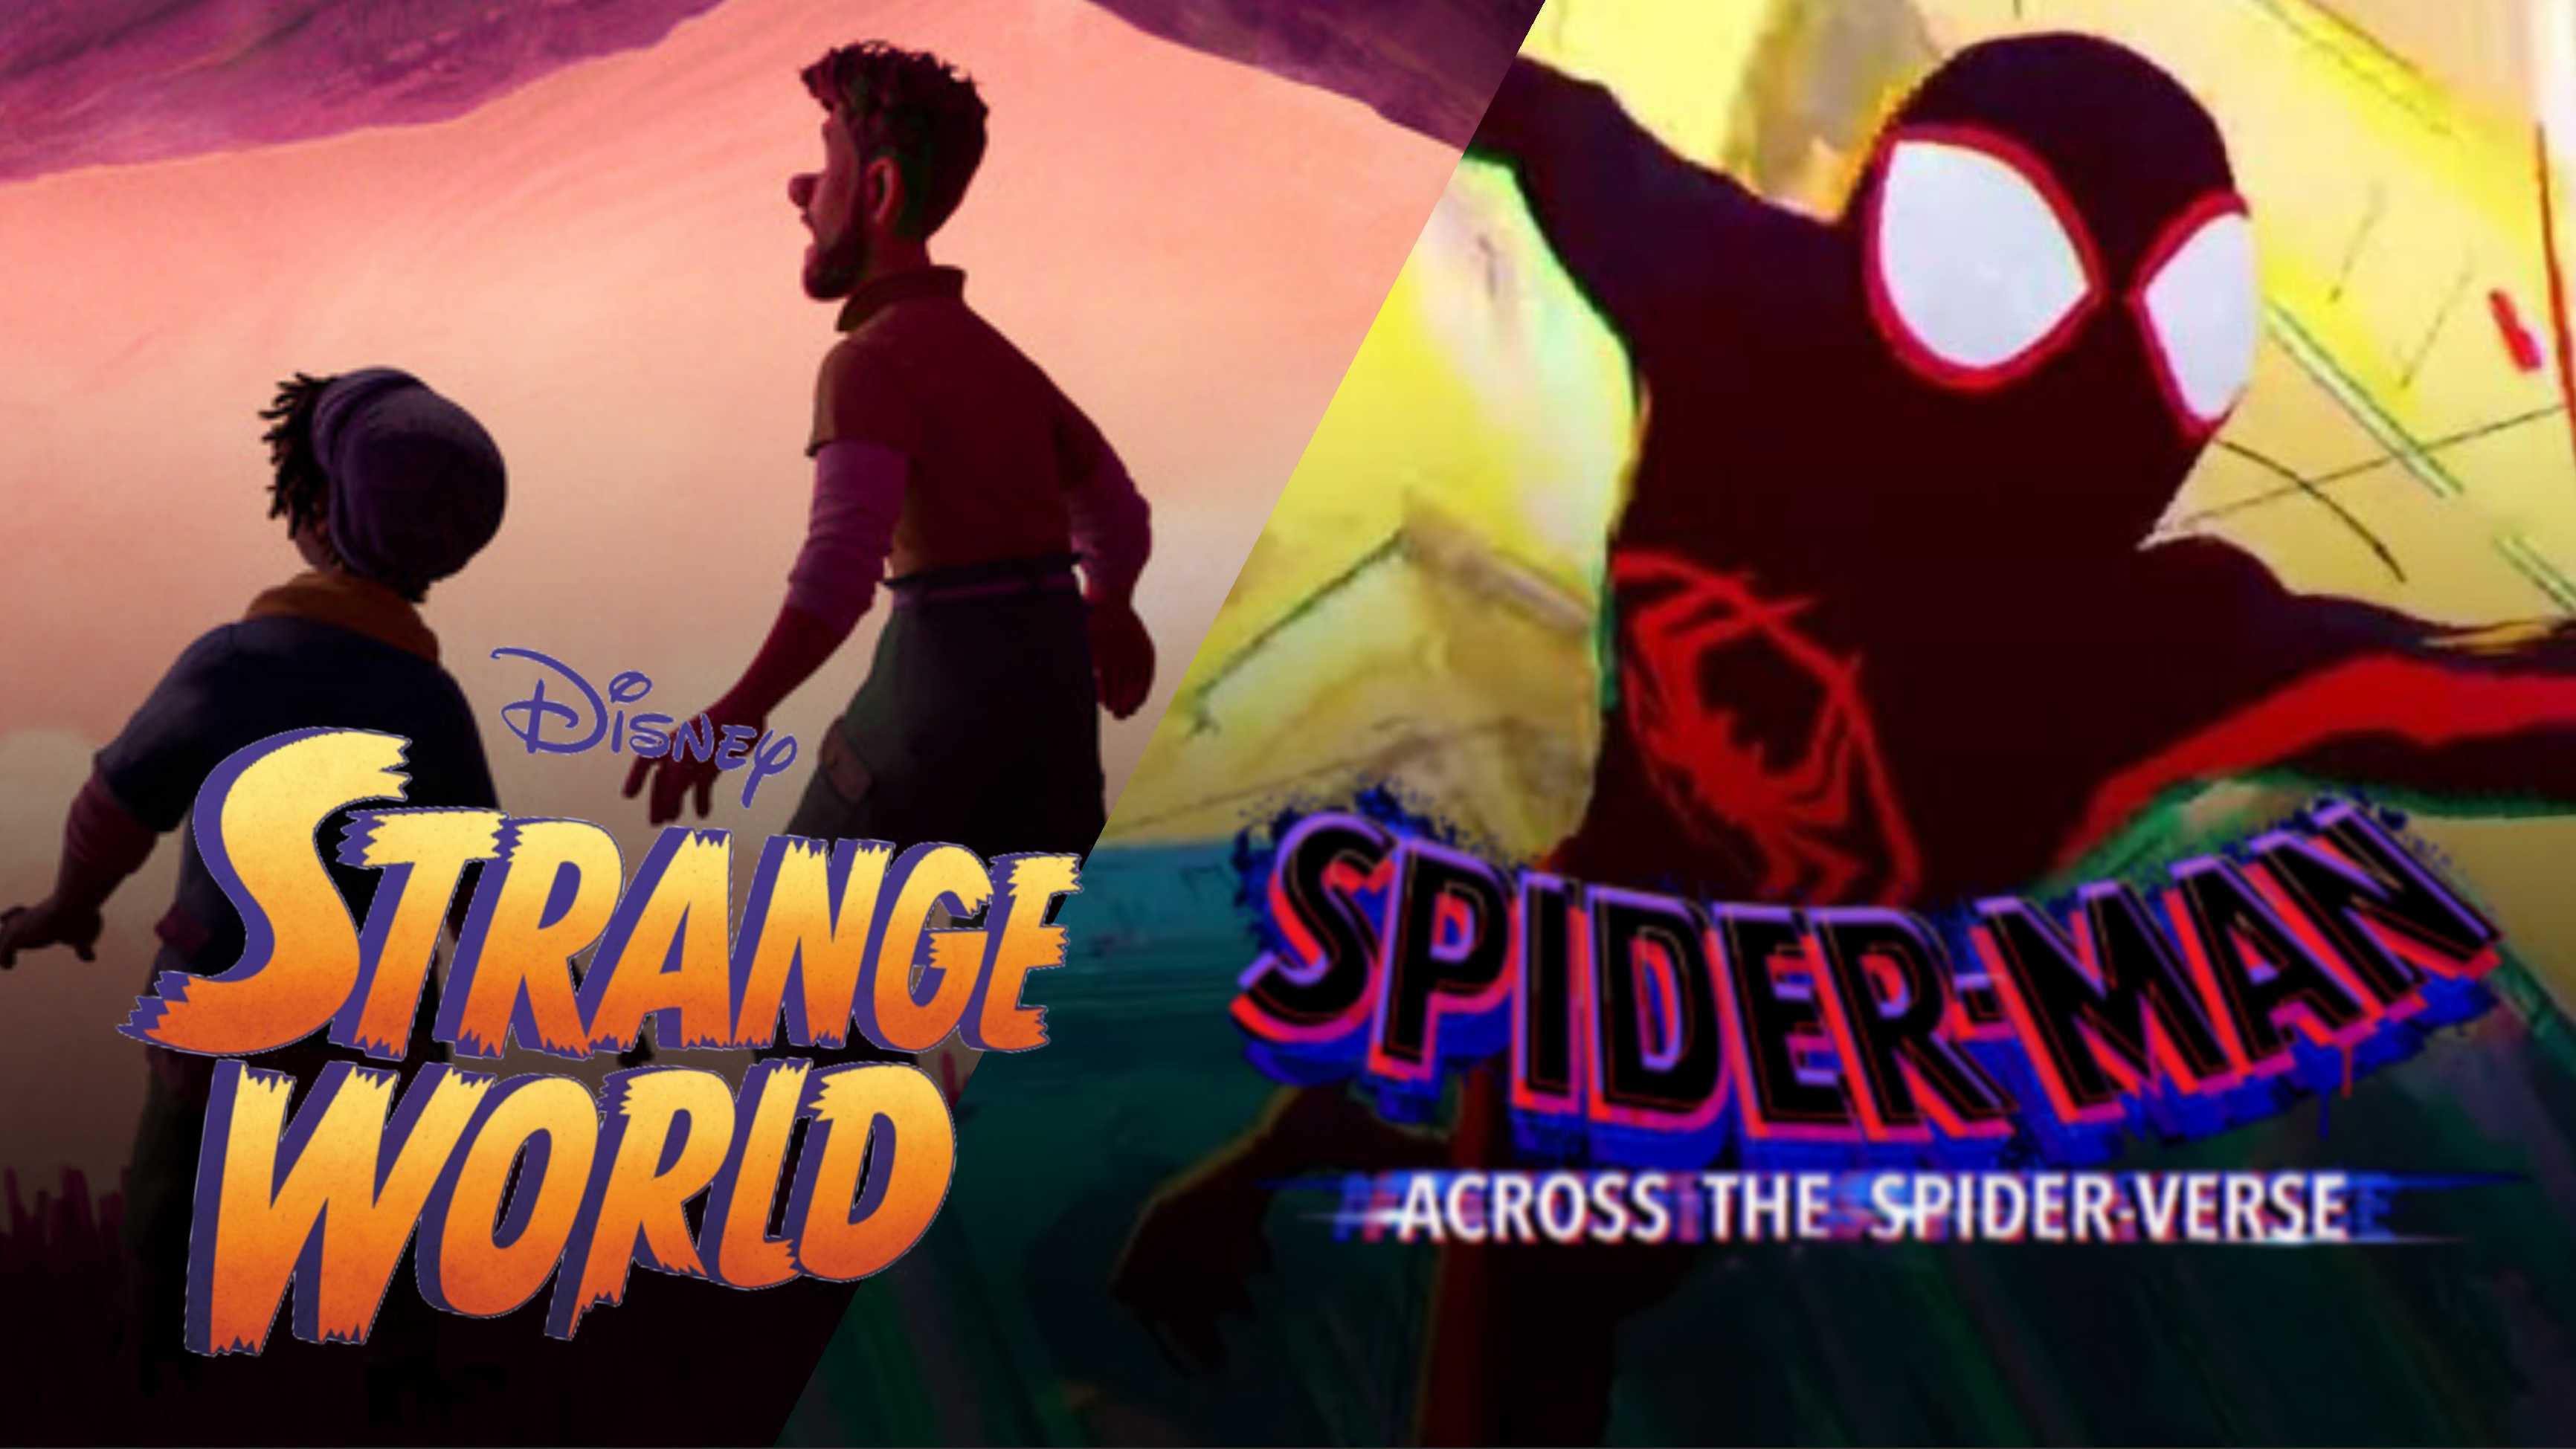 Footage Of Disney’s ‘Strange World’, Sony’s ‘Across The Spider-Verse’ To Screen At Film Festival Next Month